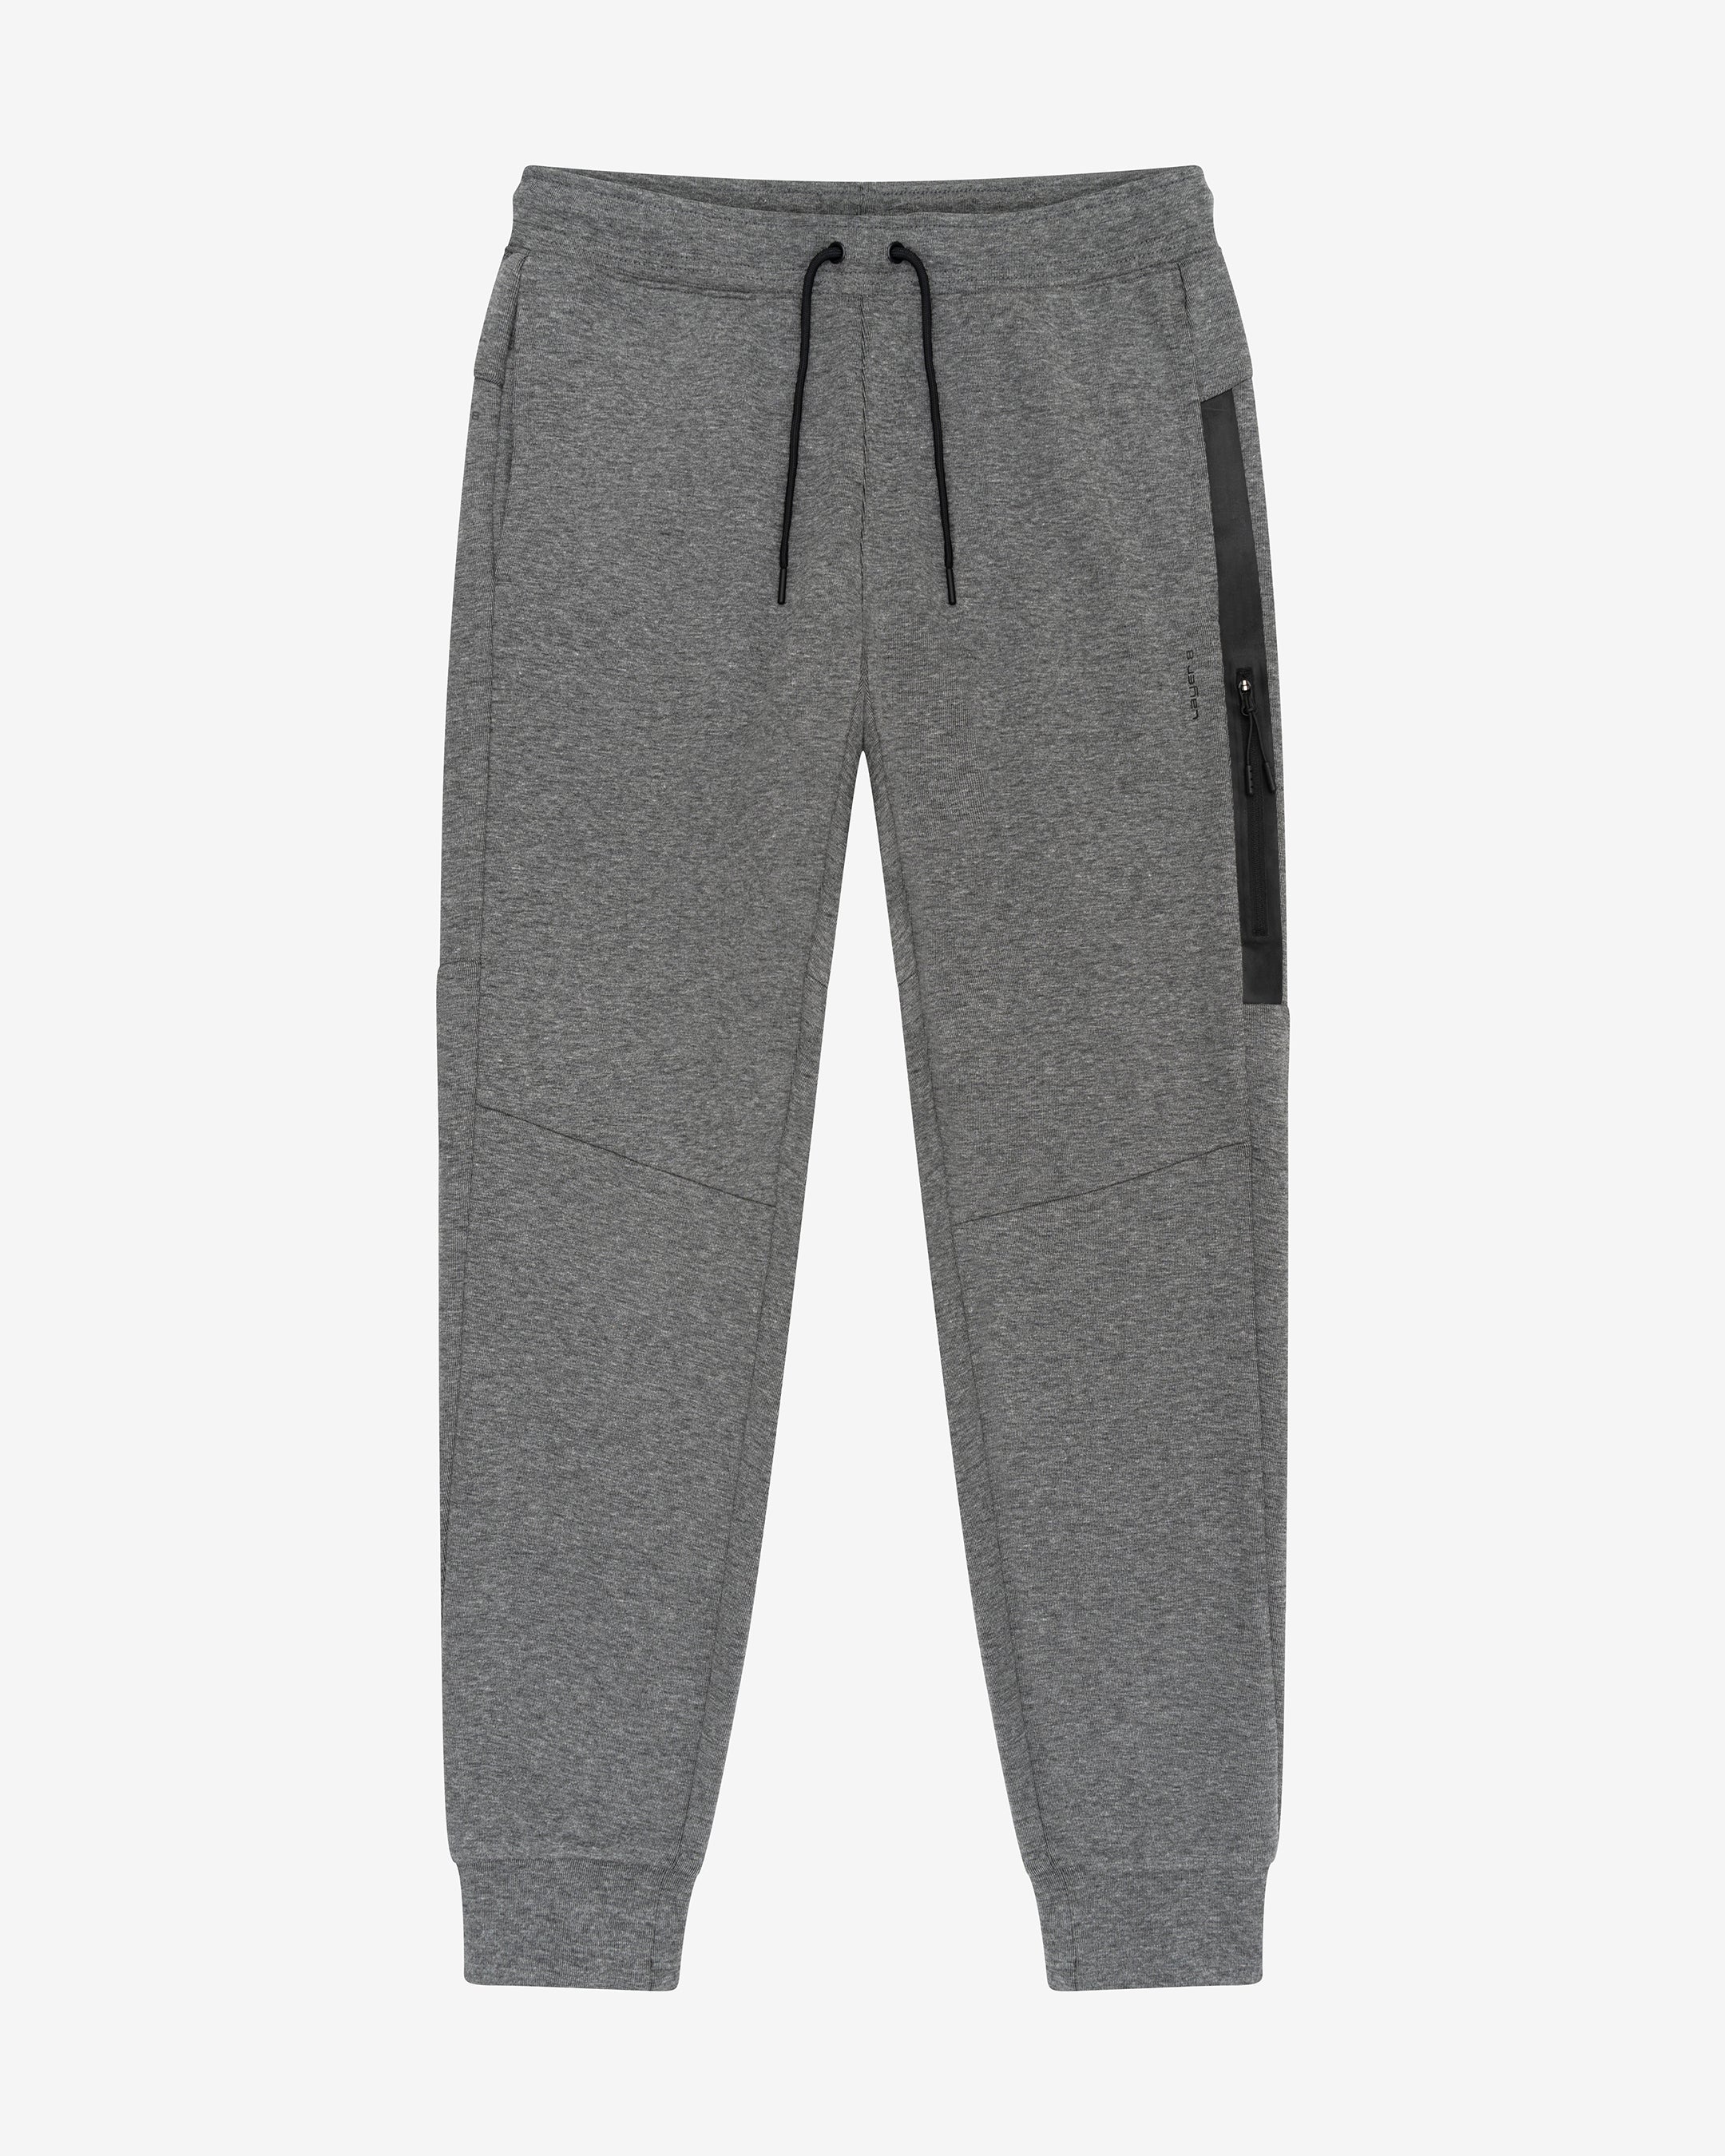 Sweatpants Layering: How to Layer Your Sweatpants Like a Pro, by Fashion  Gallery